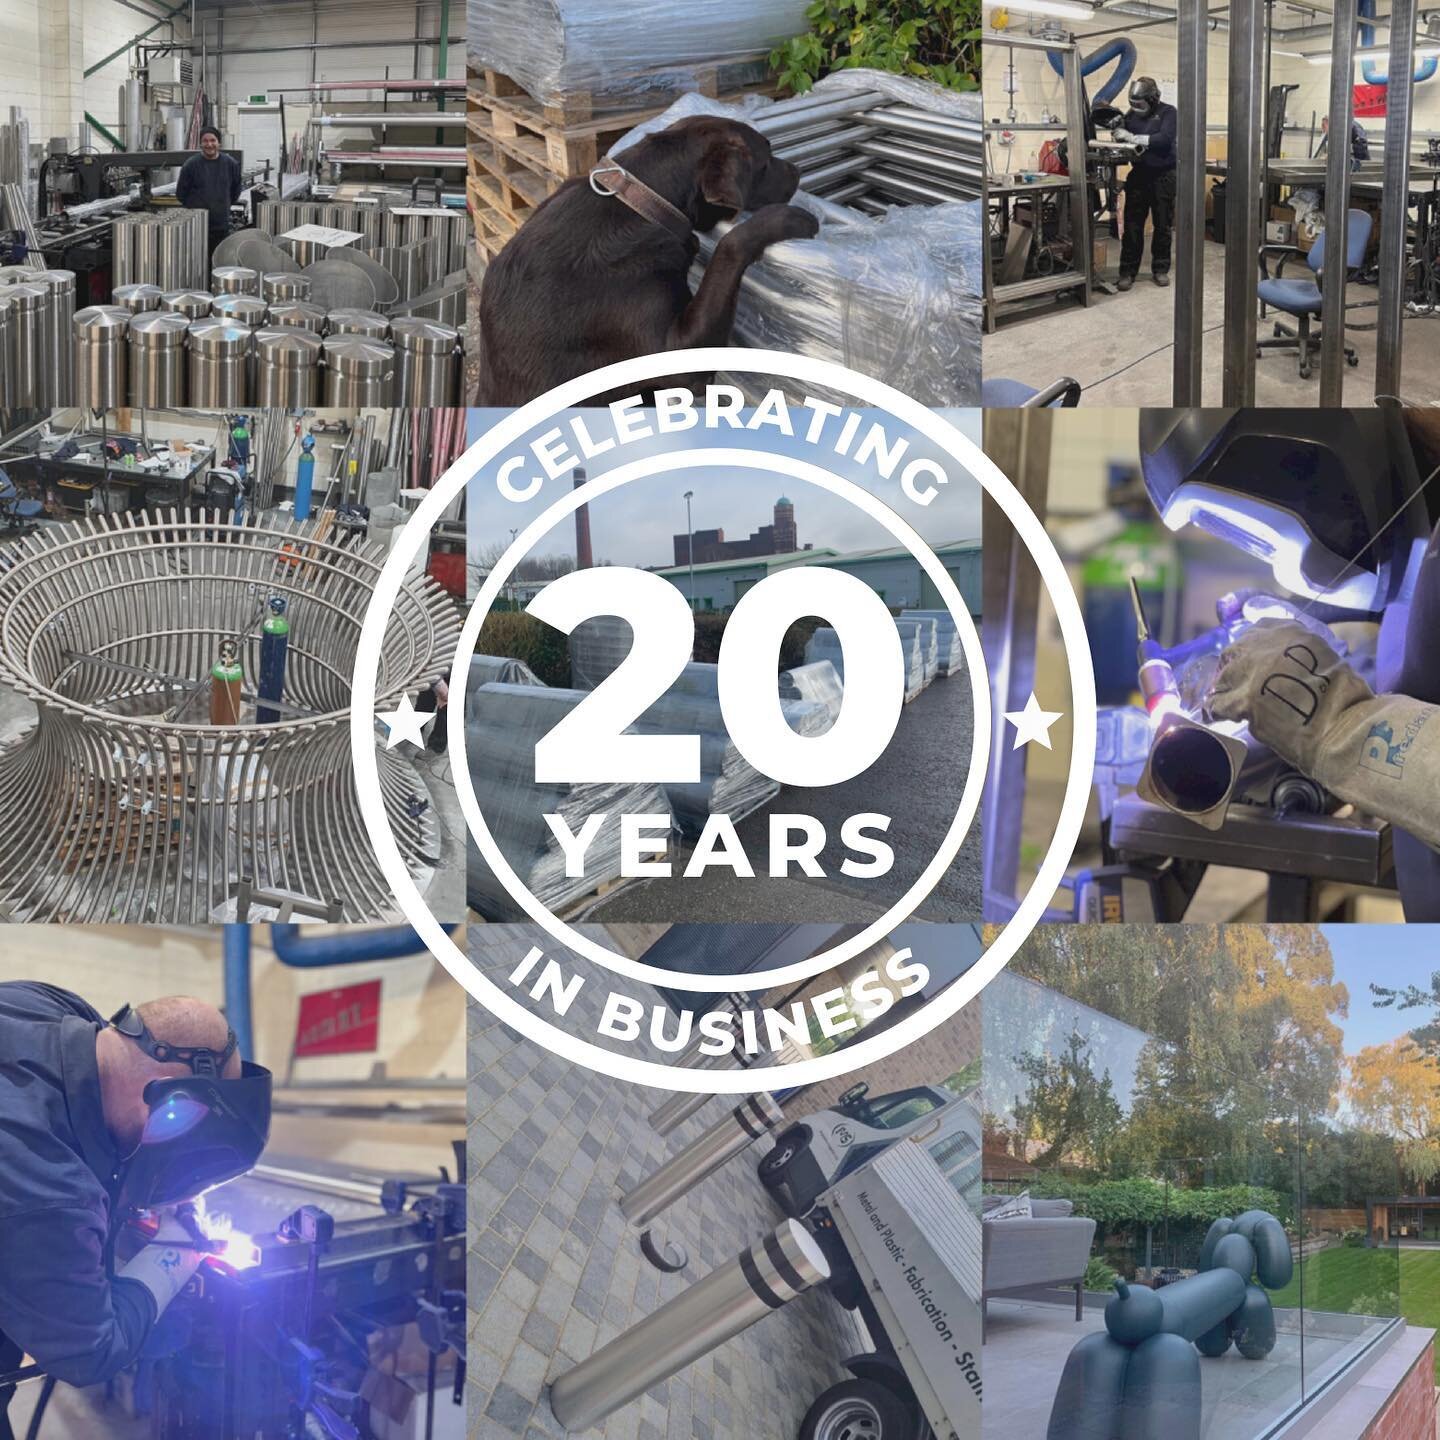 🥳 IMS IS 20! 🥳 

Happy birthday to us! We would like to say a huge thank you to every member of our team, and everyone who we have worked with over the past 20 years. We&rsquo;re very proud of the work we&rsquo;ve done, and the friends made along t